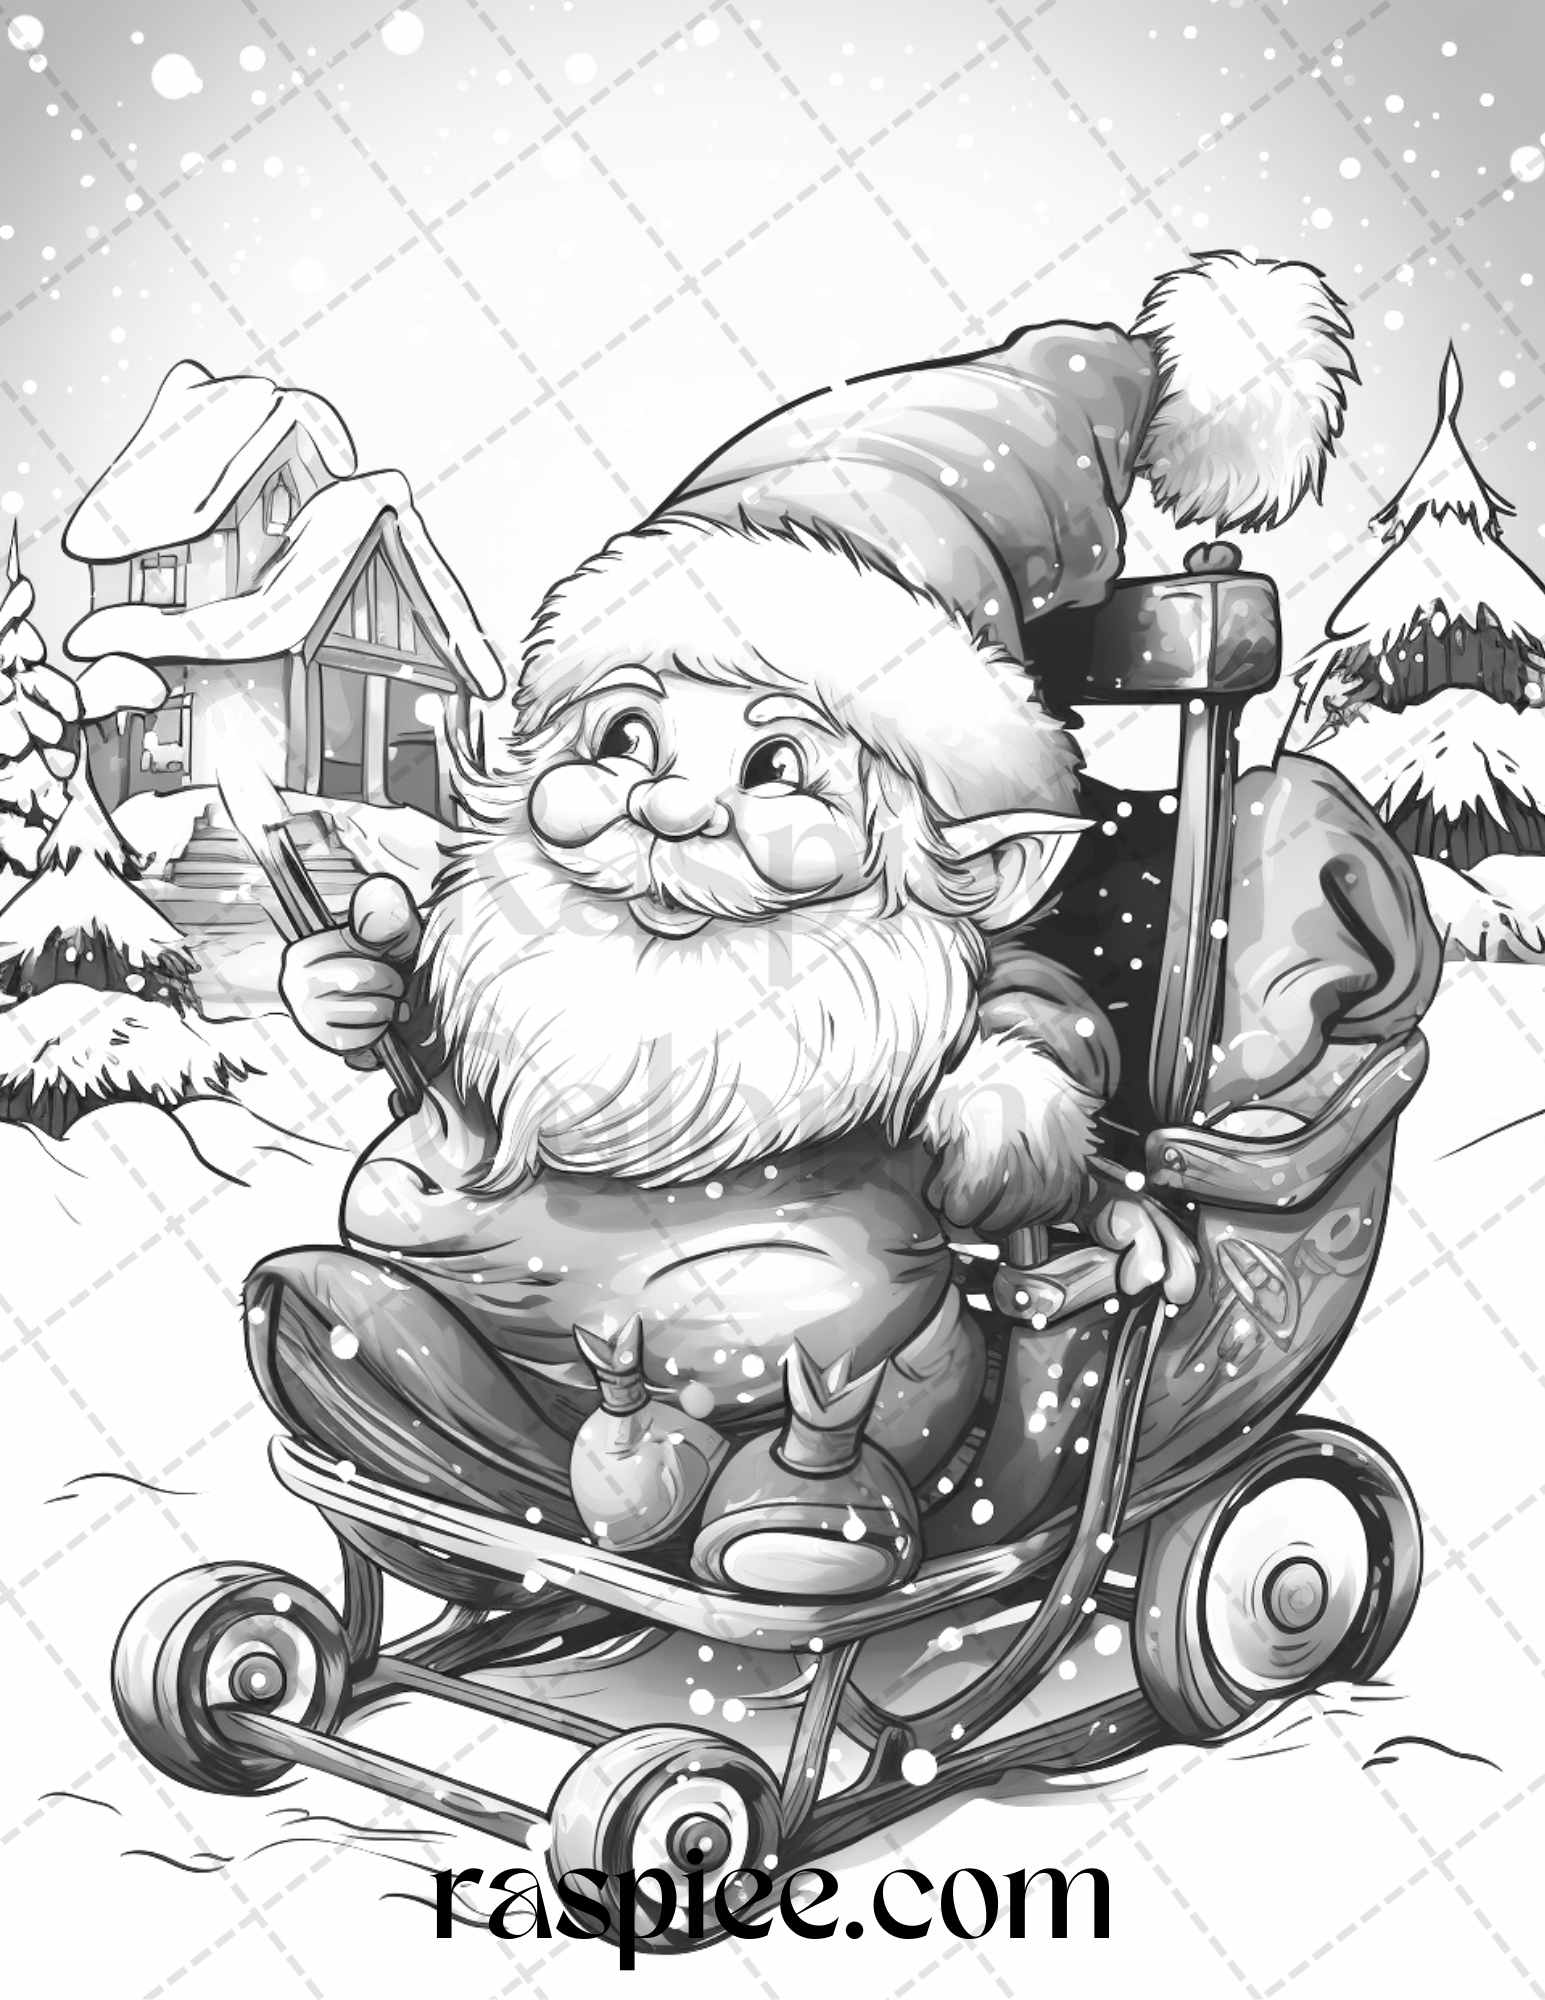 Christmas Gnome Coloring Page, Printable Adult and Kids Coloring, Seasonal Coloring Activity, Winter Coloring Pages, Home Entertainment Activity, Digital Downloadable Coloring, Christmas Coloring Pages, Christmas Coloring Sheets, Xmas Coloring Pages, Holiday Coloring Pages, Gnomes Coloring Pages